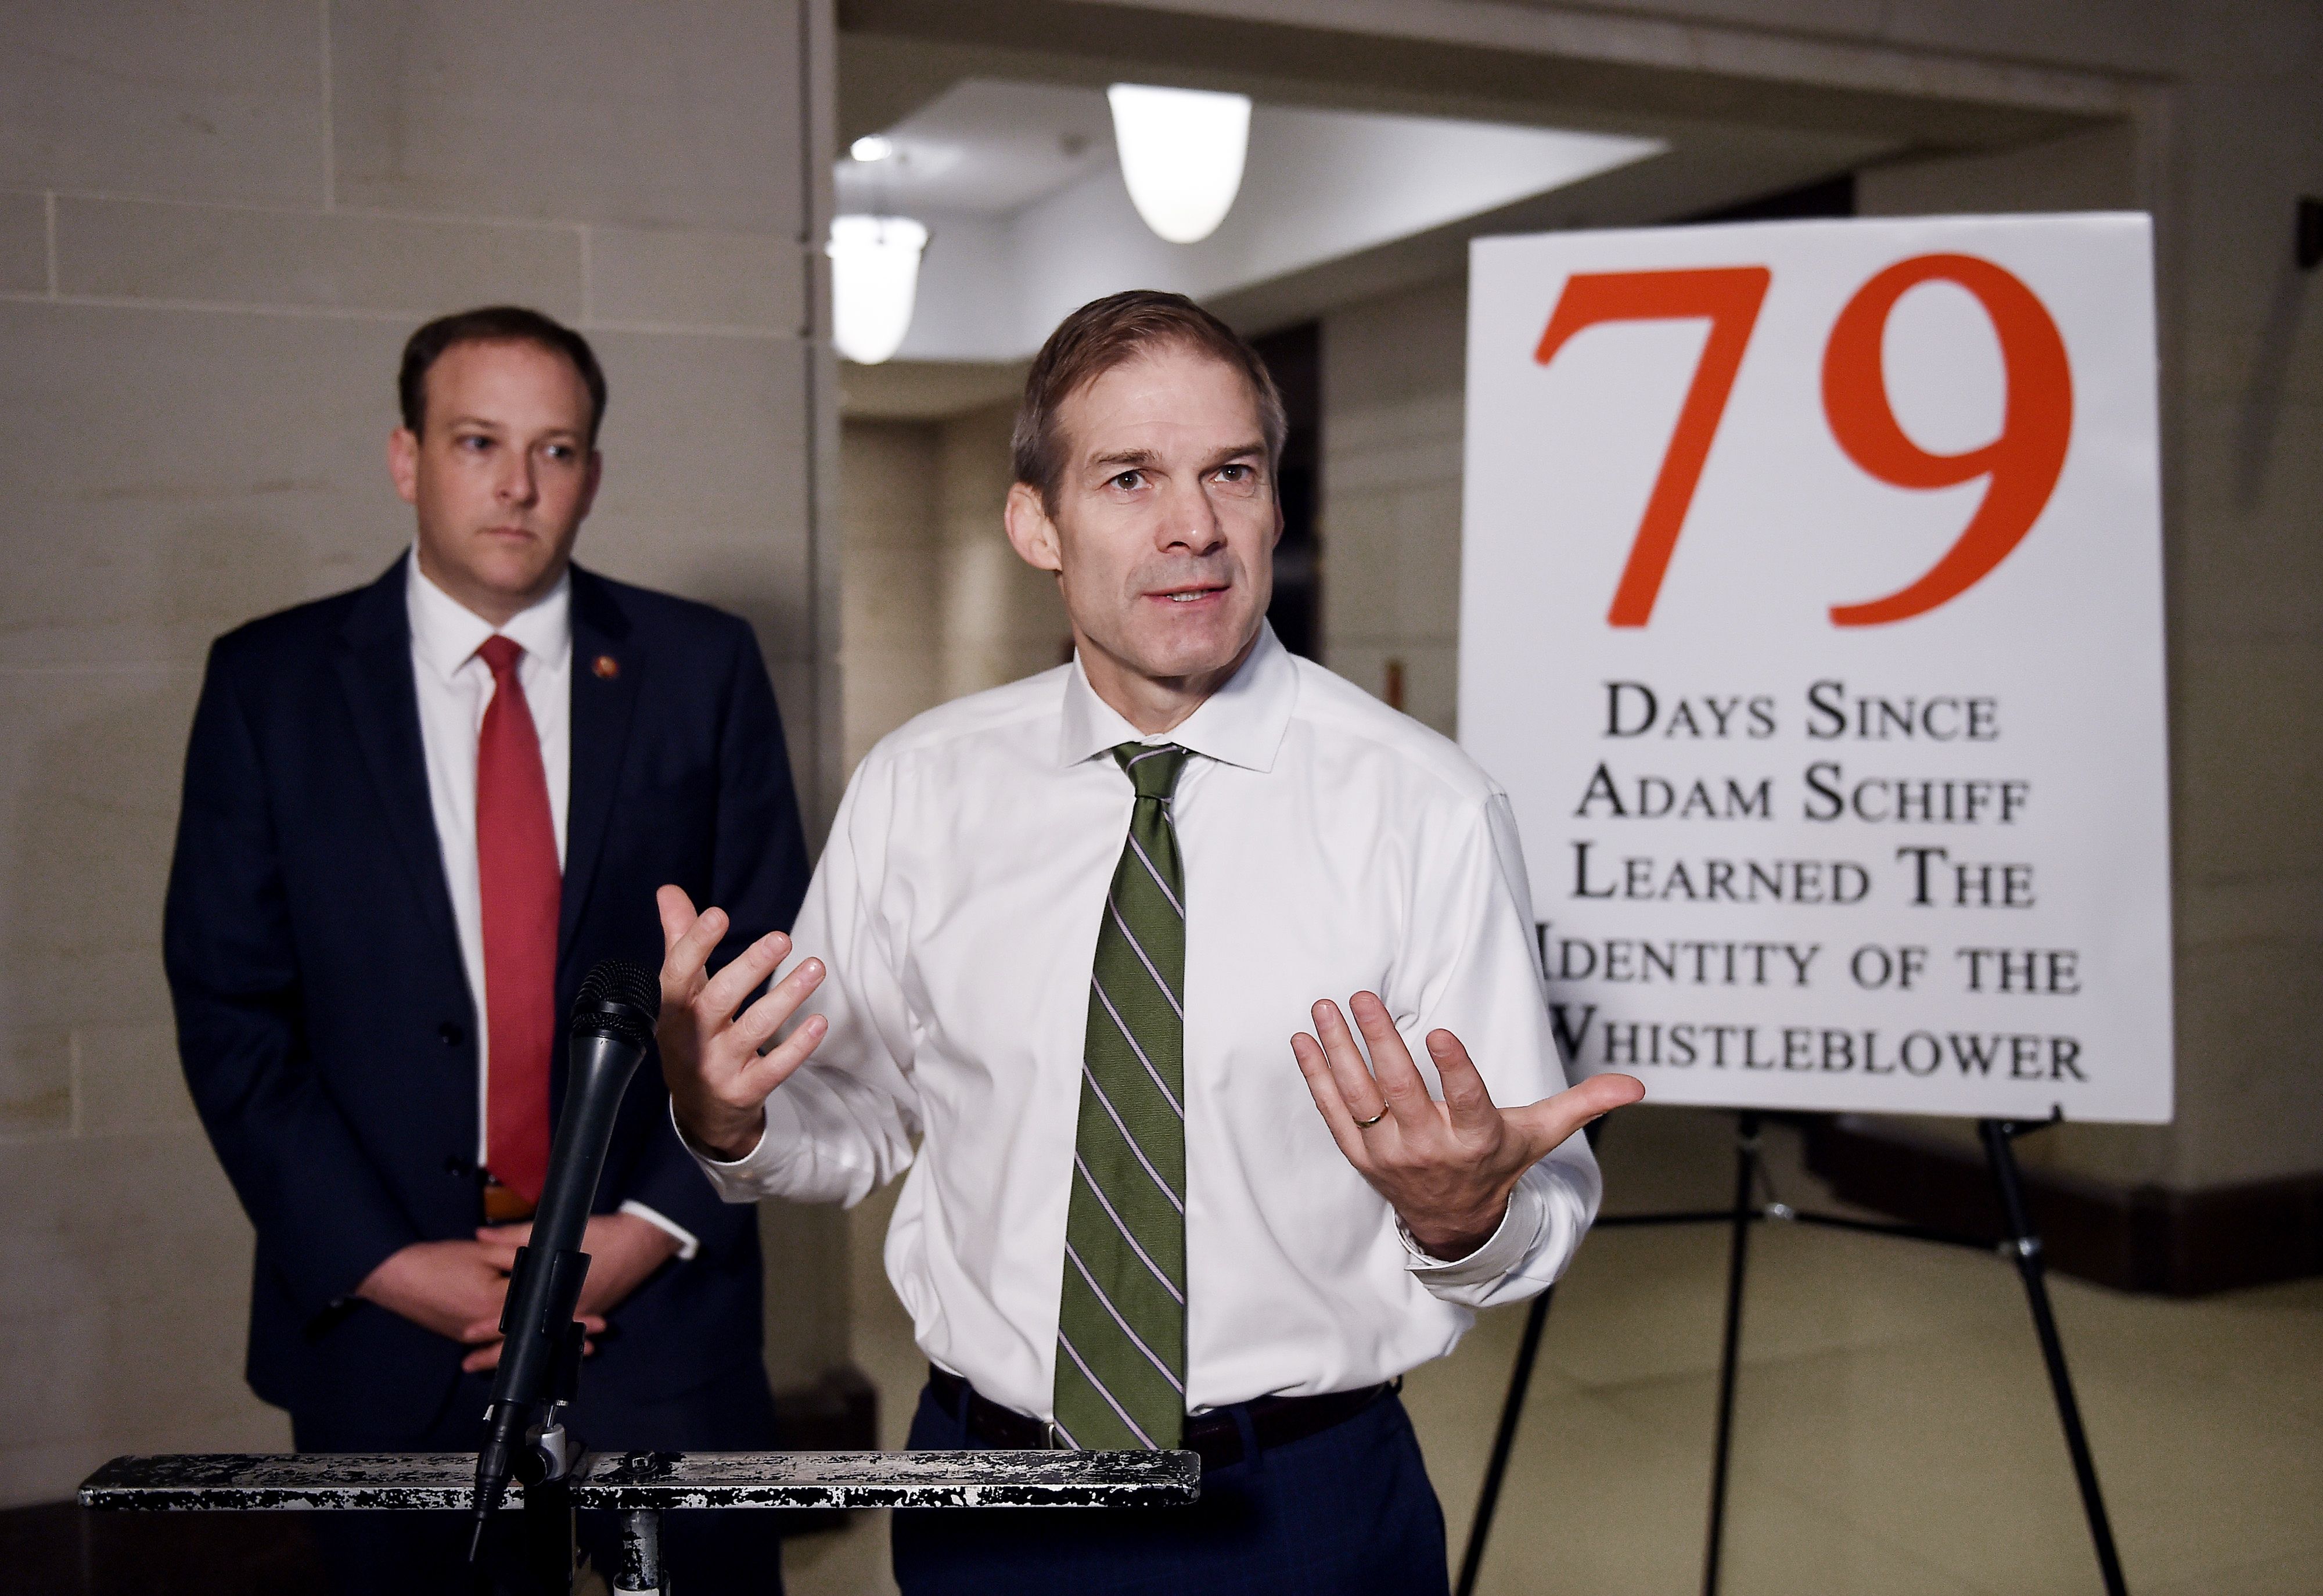 US Representative Jim Jordan (R-OH) speaks to the media as Representative Lee Zeldin (R-NY) looks on outside of the Sensitive Compartmented Information Facility (SCIF) at the US Capitol in Washington, DC on October 30, 2019. (OLIVIER DOULIERY/AFP via Getty Images)